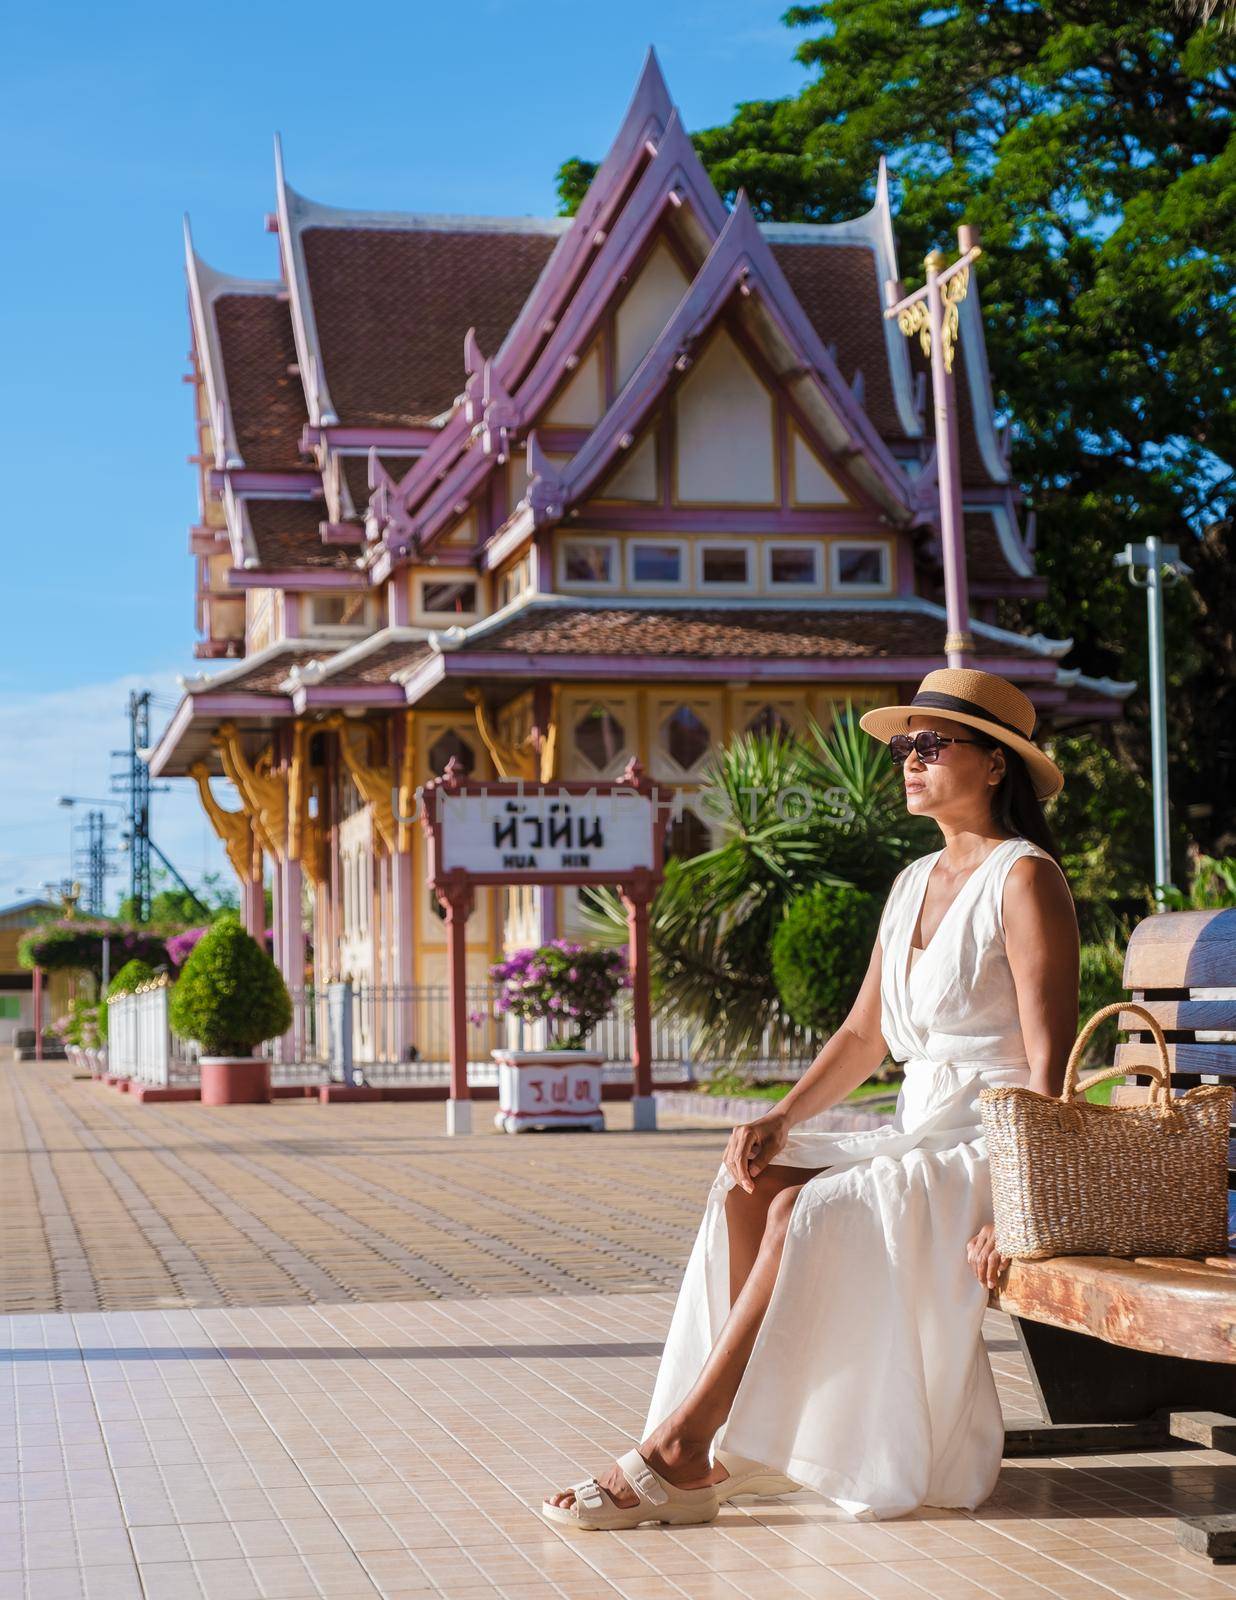 Hua Hin train station in Thailand on a bright day by fokkebok